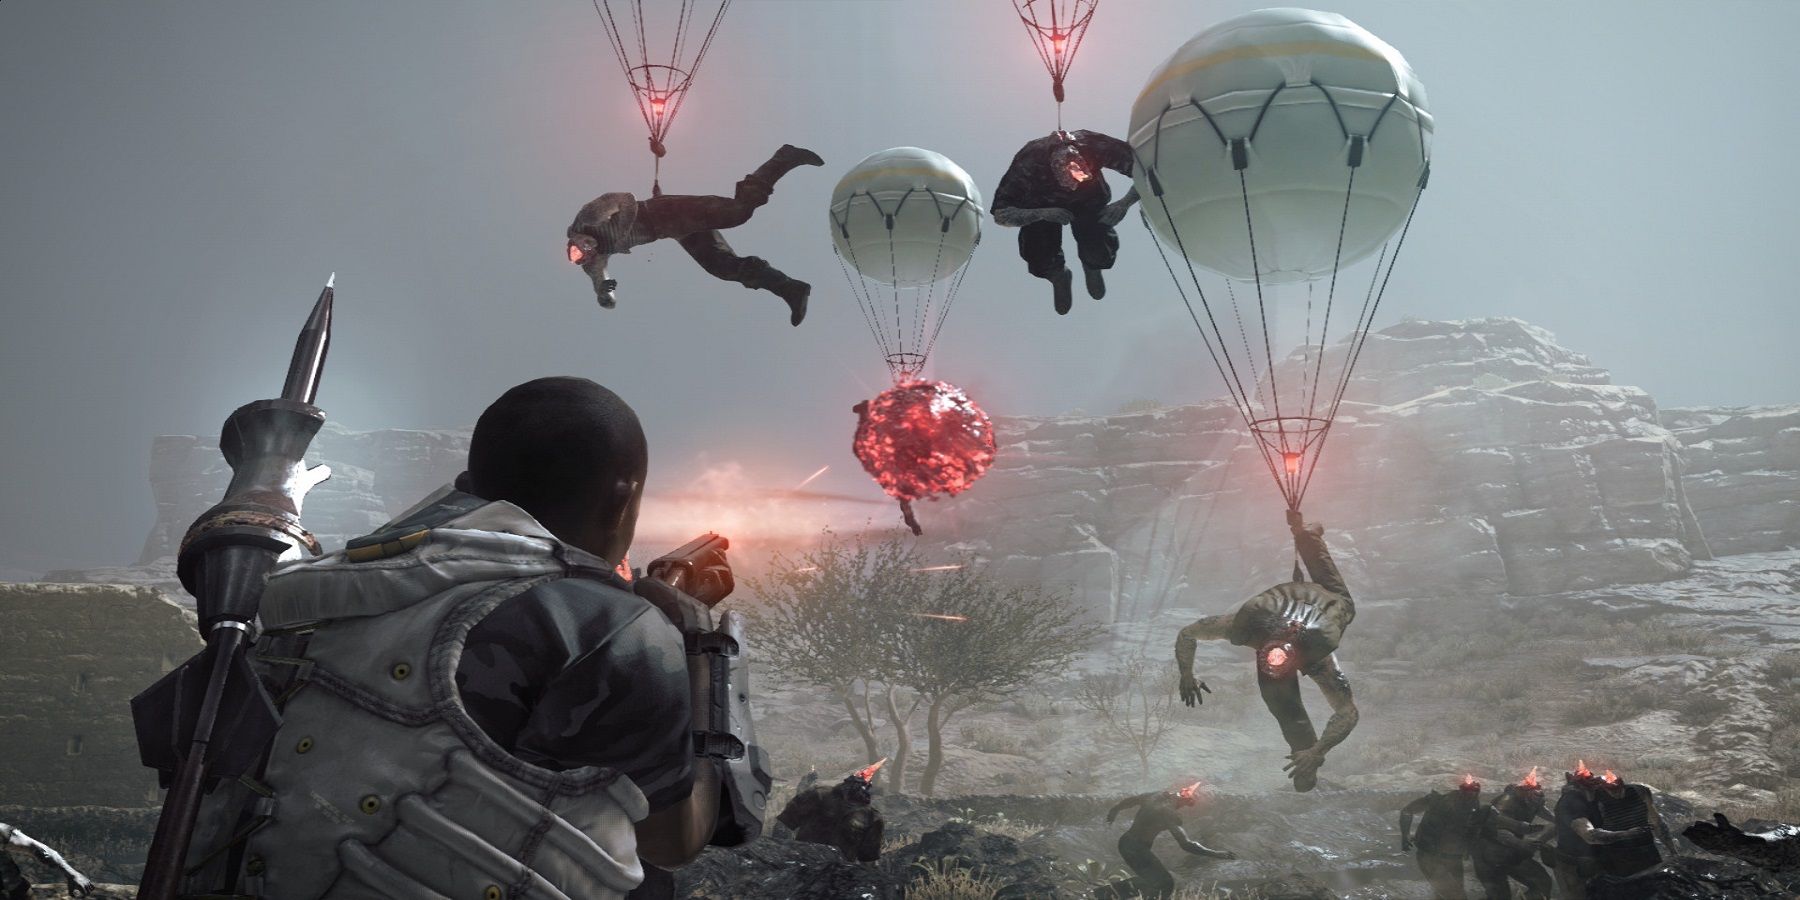 player using the fulton extraction system in Metal Gear Survive